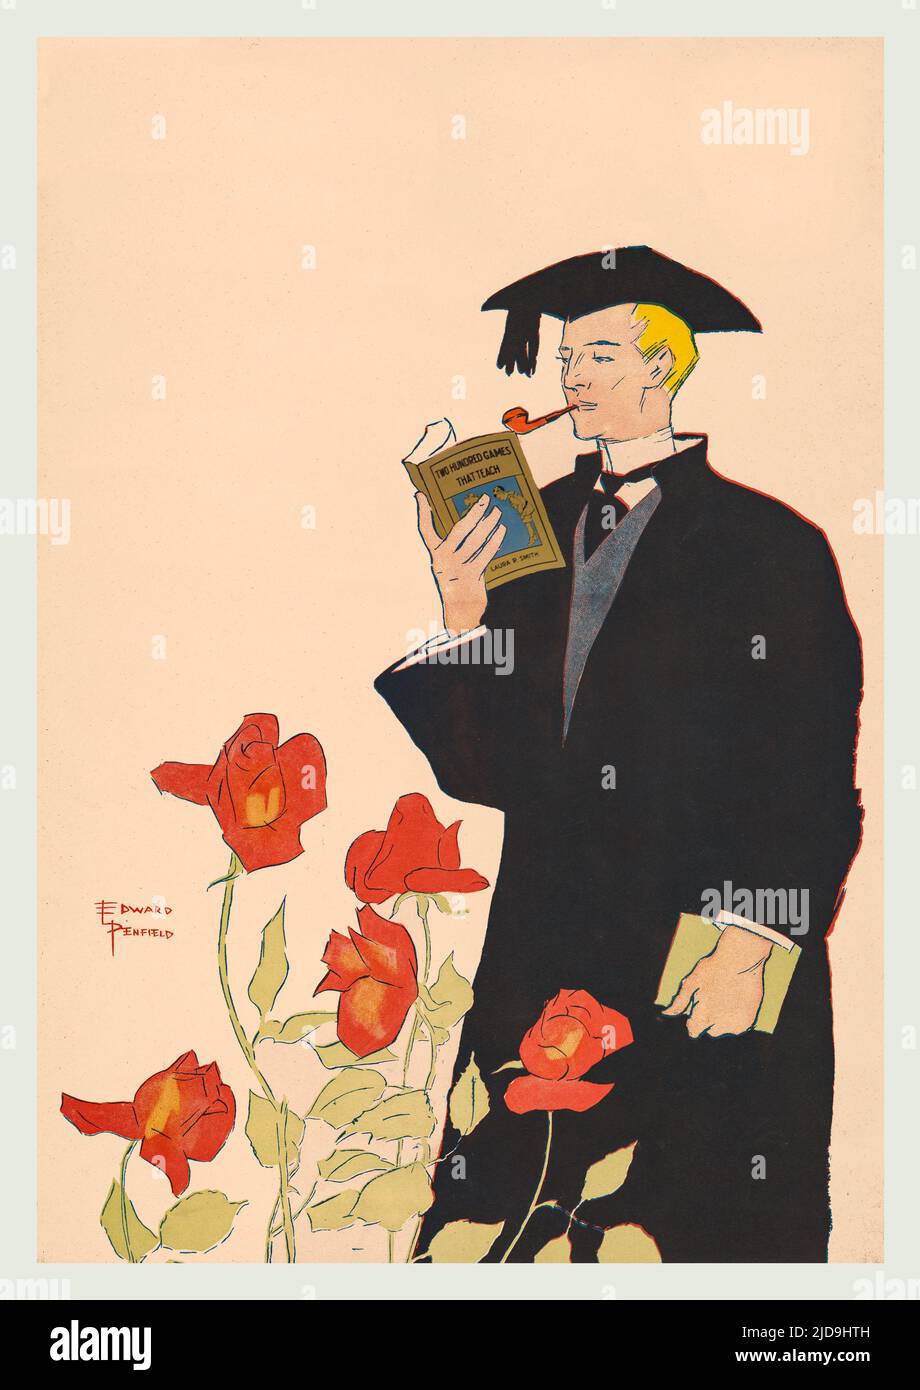 A detail from a turn of the 20th century illustration by Edward Penfield (1866-1925) considered by many to be the father of the American poster. Featuring a young teacher reading a text book. Originally a cover to Harper’s Magazine, the oldest general-interest monthly in America. Stock Photo